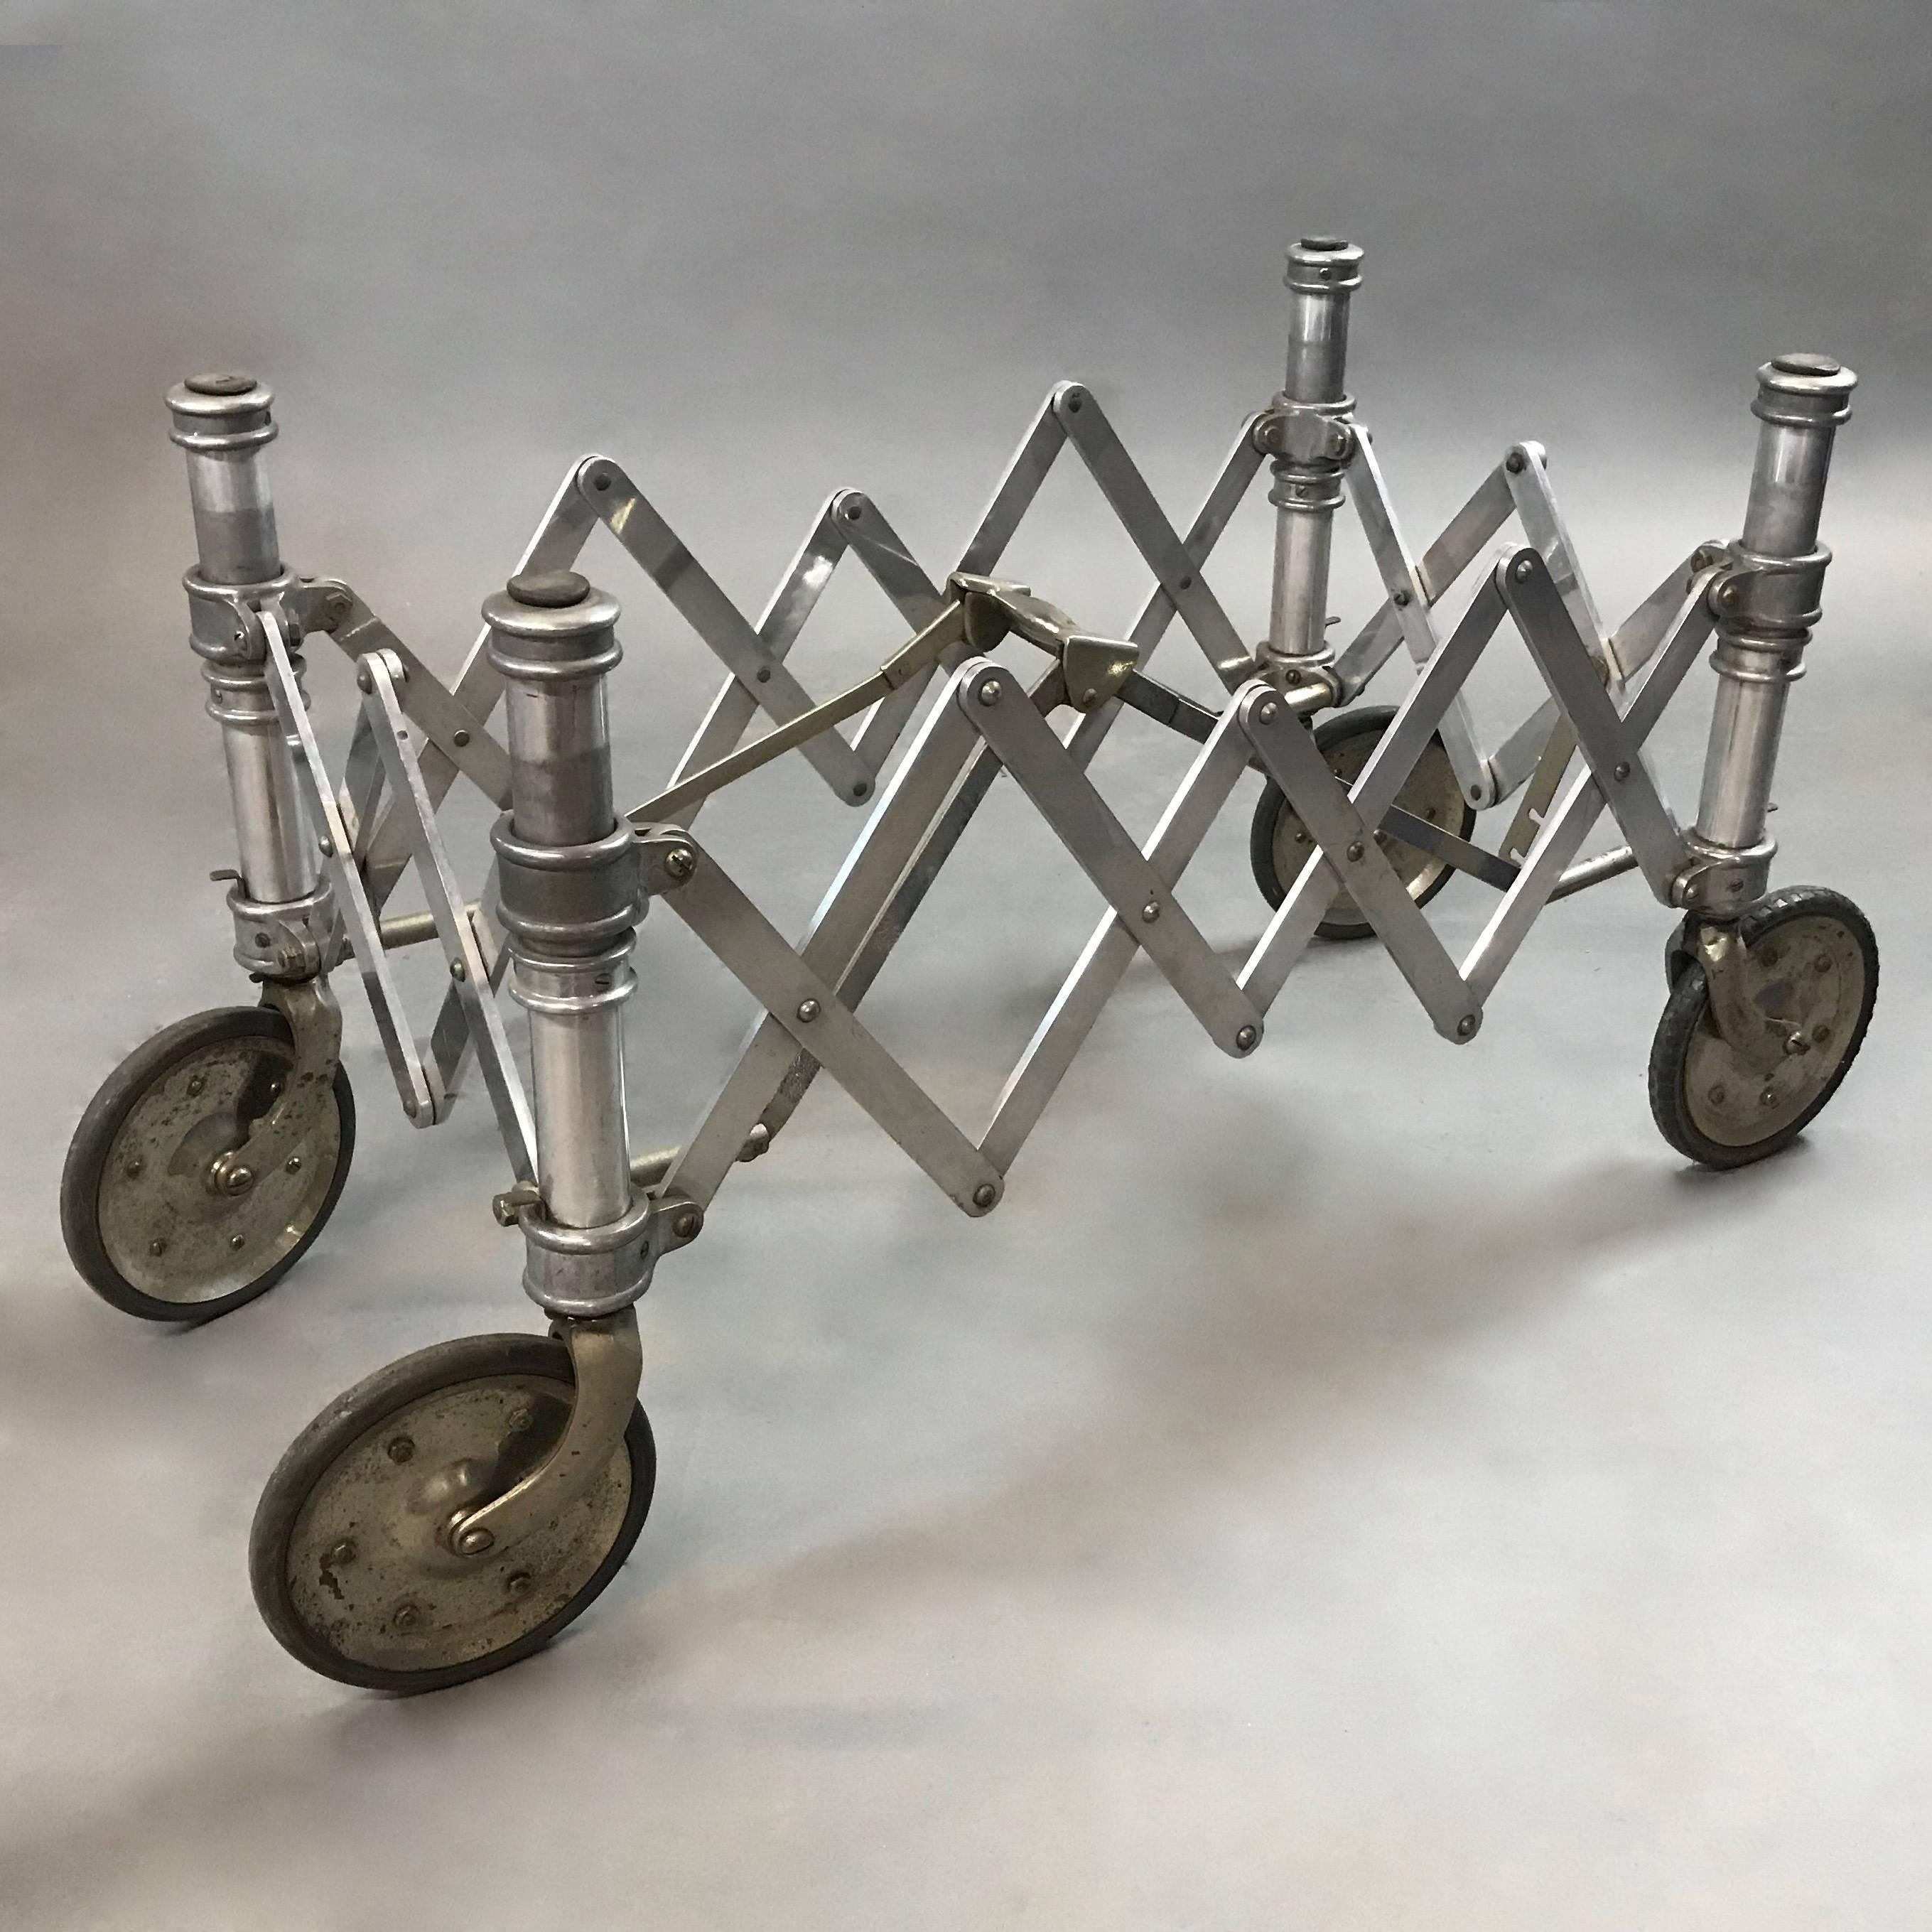 Industrial, machine-age, aluminum, accordion base, church truck, gurney expands to 33in x 18in x 20.5in height to make a wonderful coffee table base. The piece locks into place once the handle is fully depressed and features rubber bumpers on the